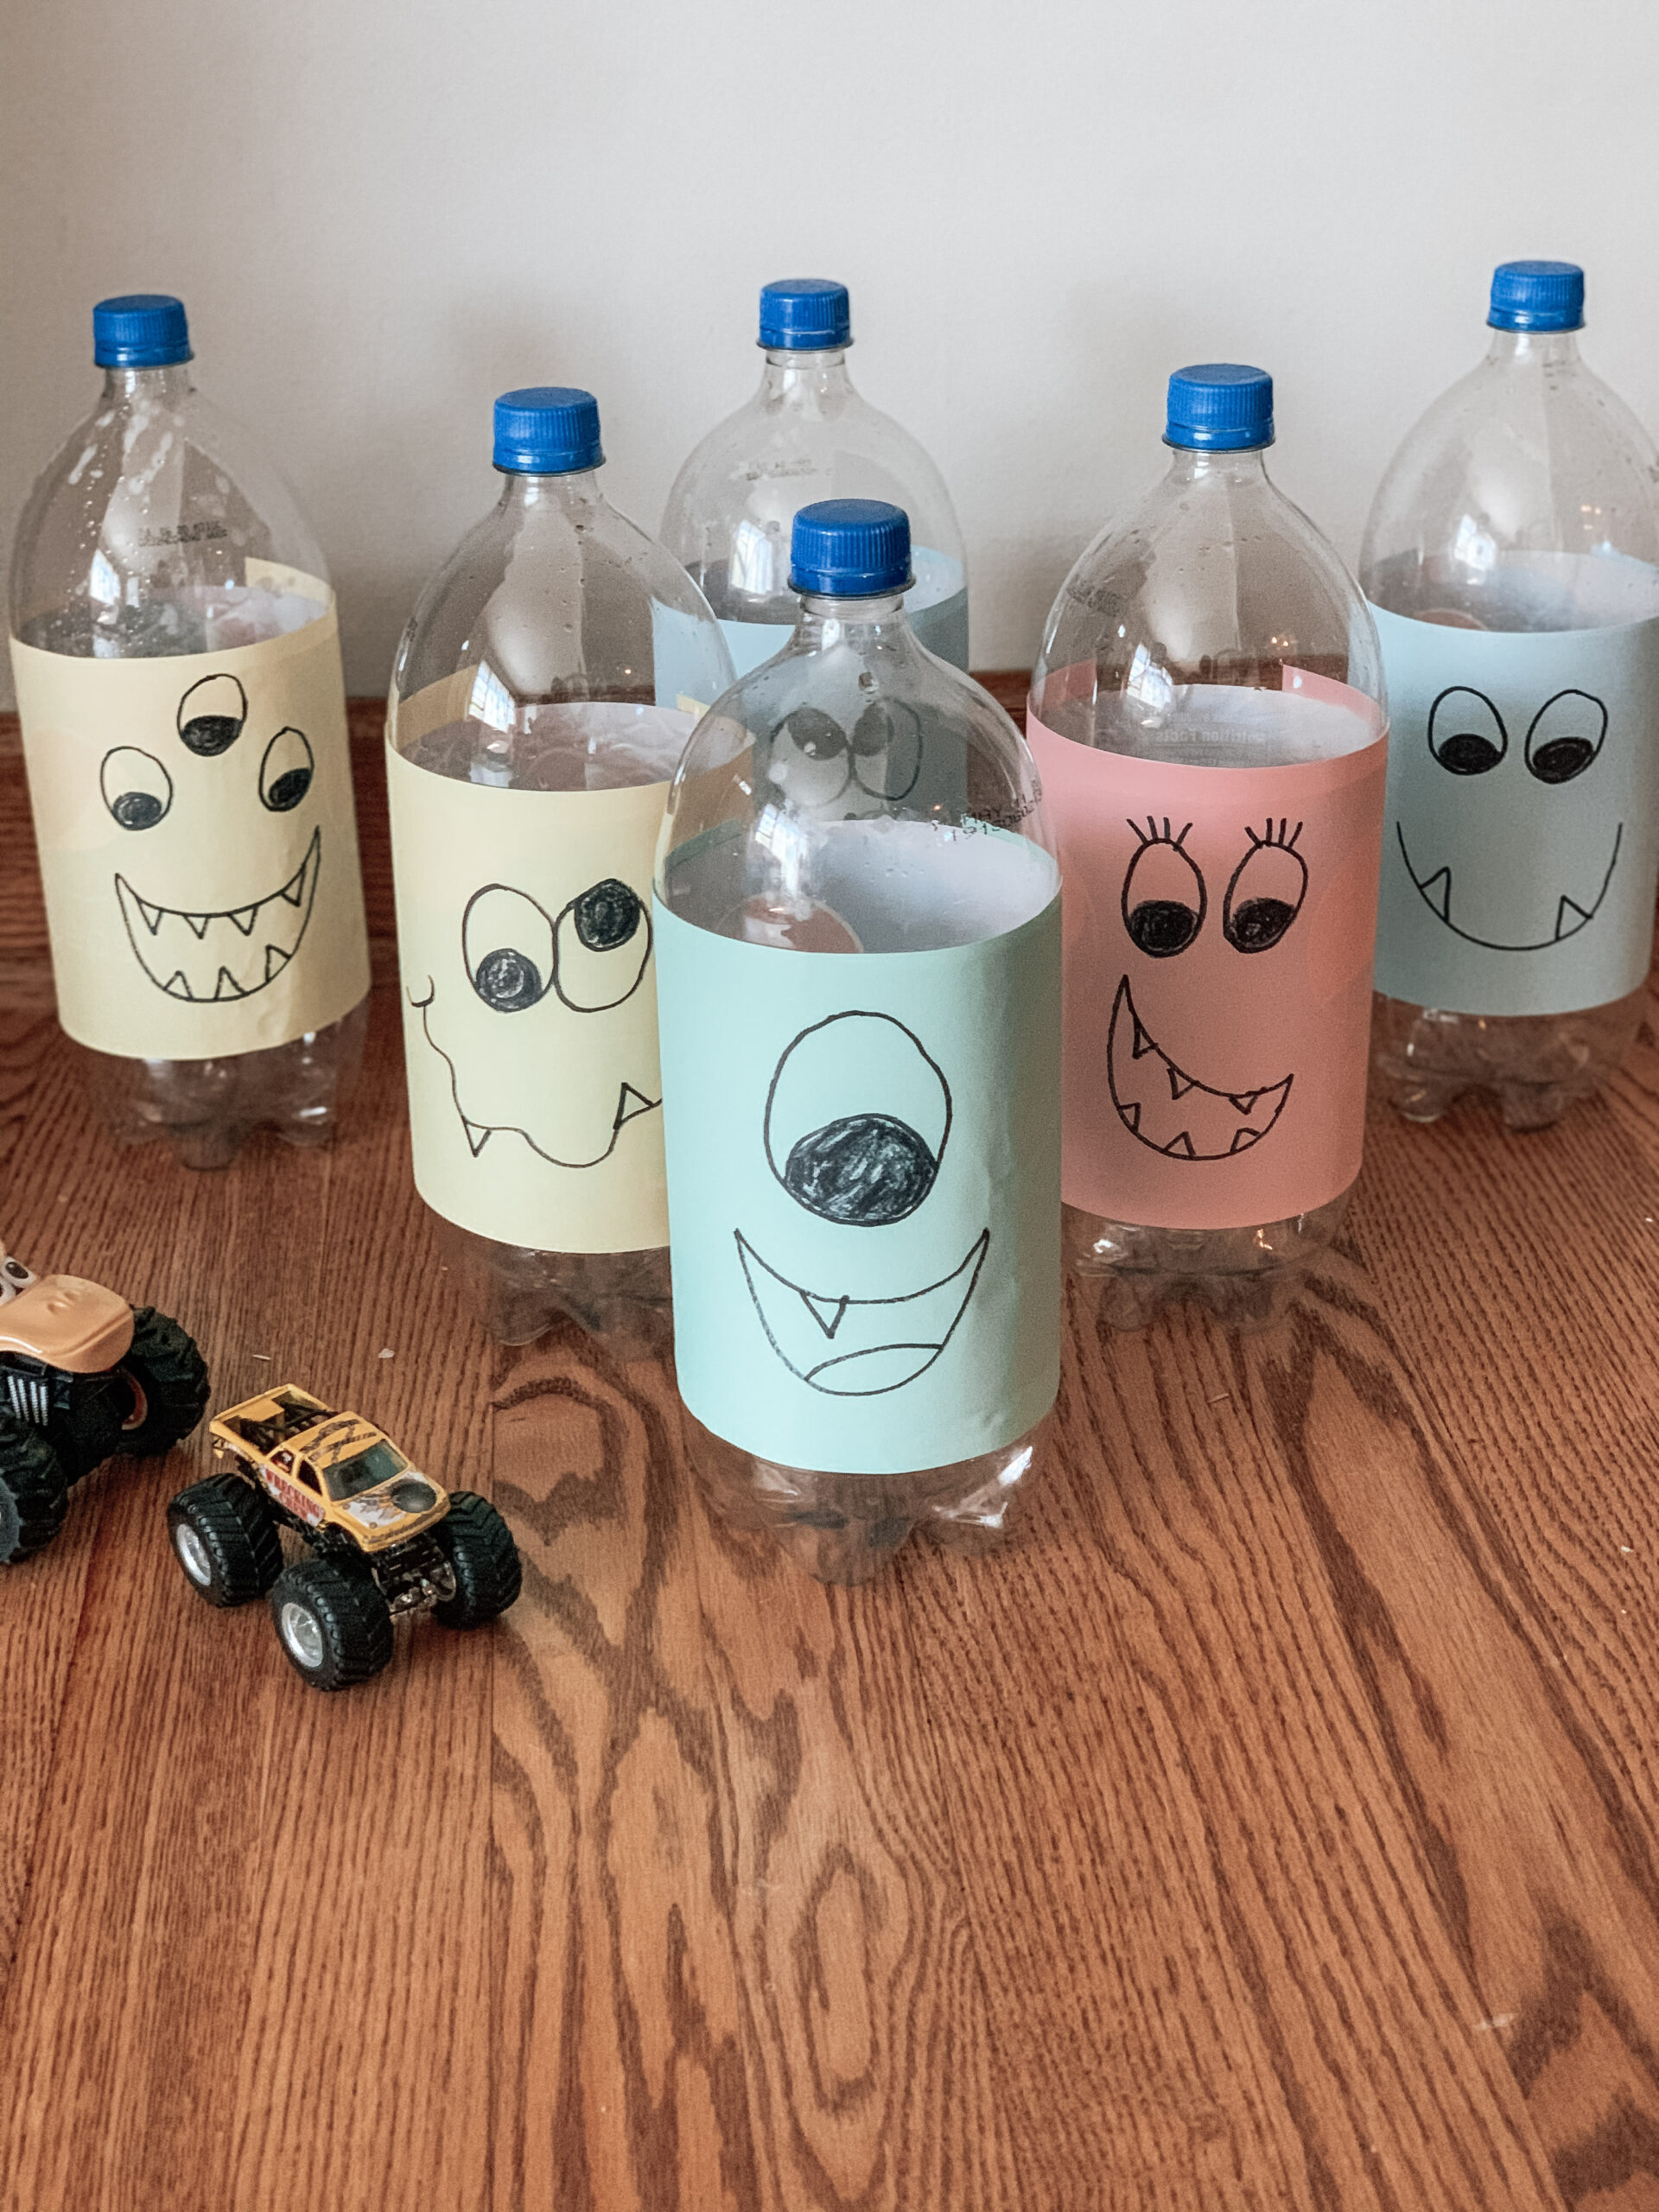 Completed repurposed monster bowling kid activity. Shows how to reuse bottles and monster truck toys.